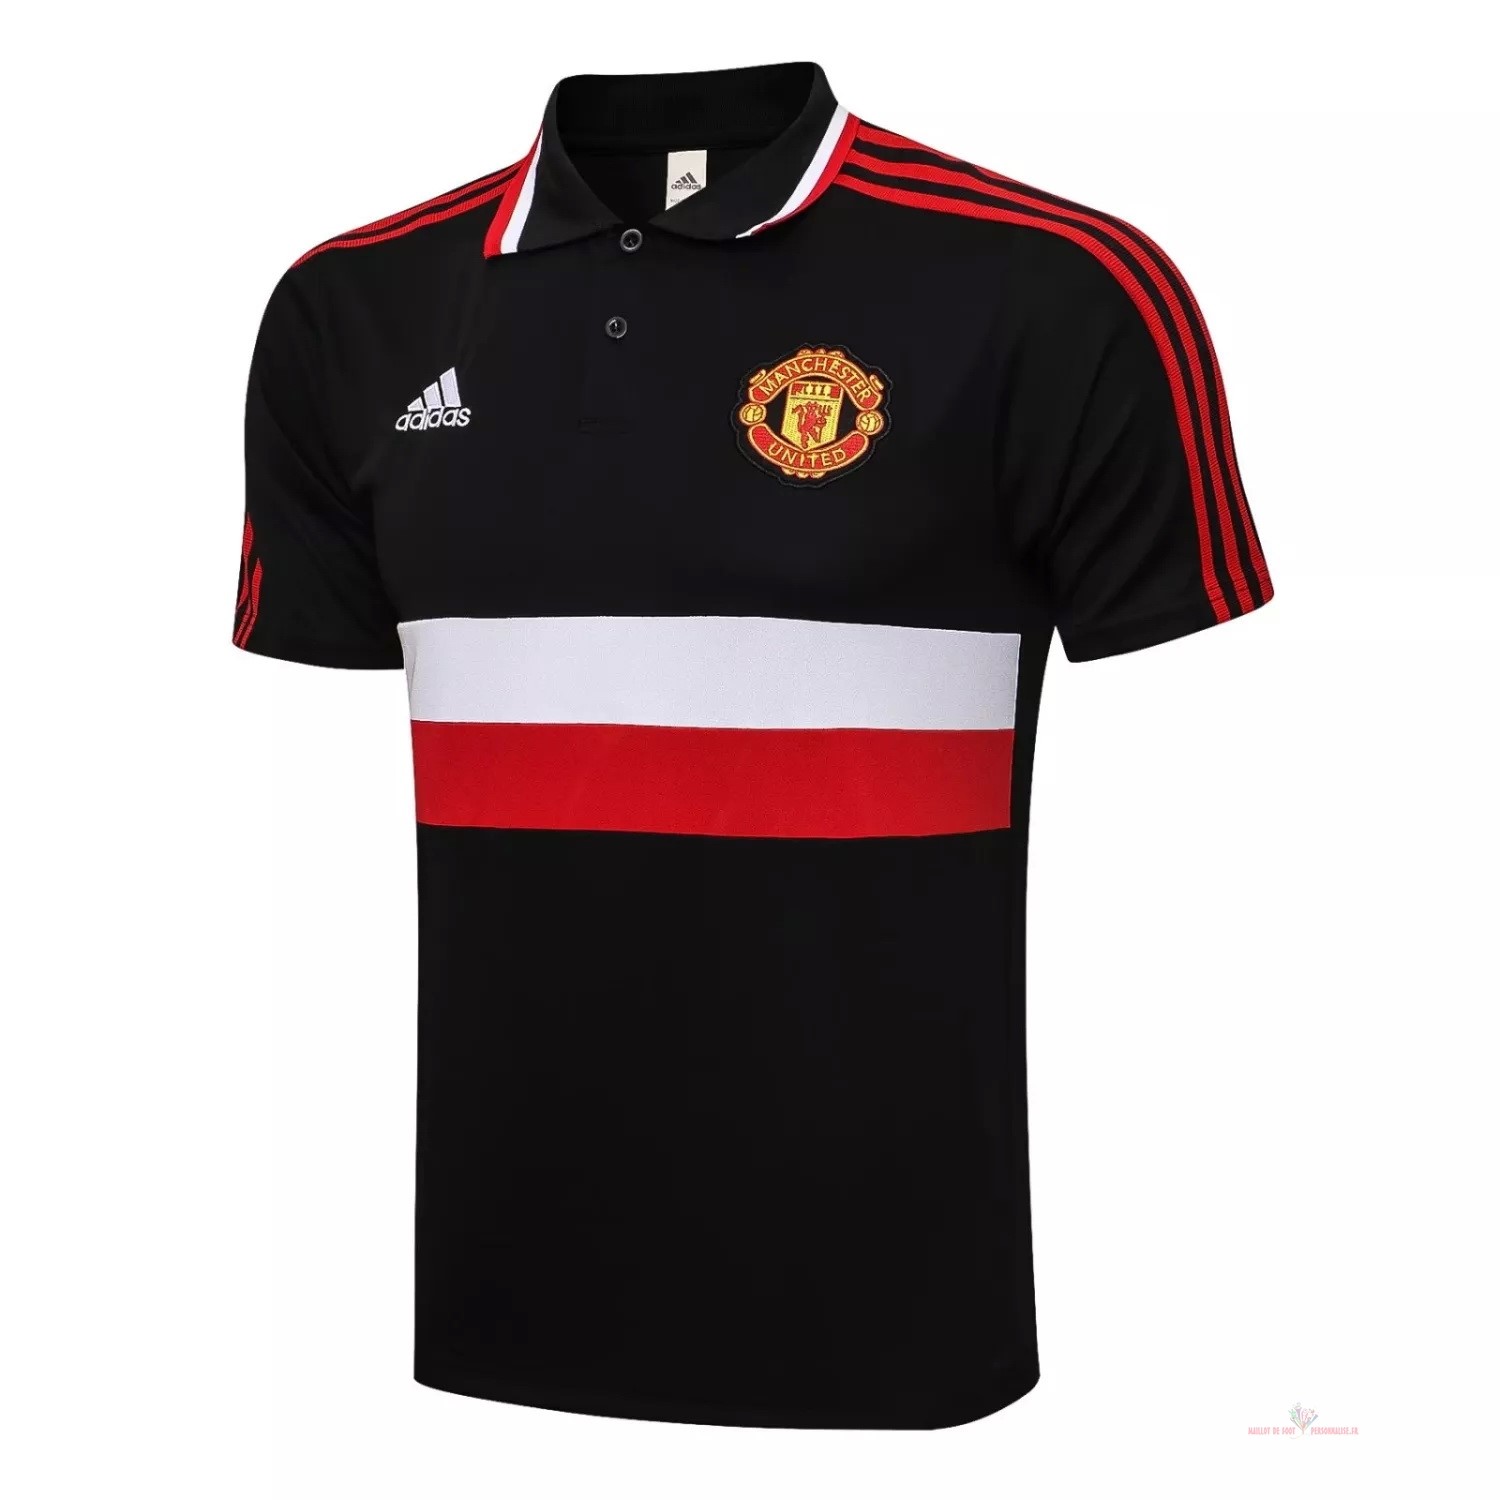 Maillot Om Pas Cher adidas Polo Manchester United 2021 2022 Noir Blanc Rouge